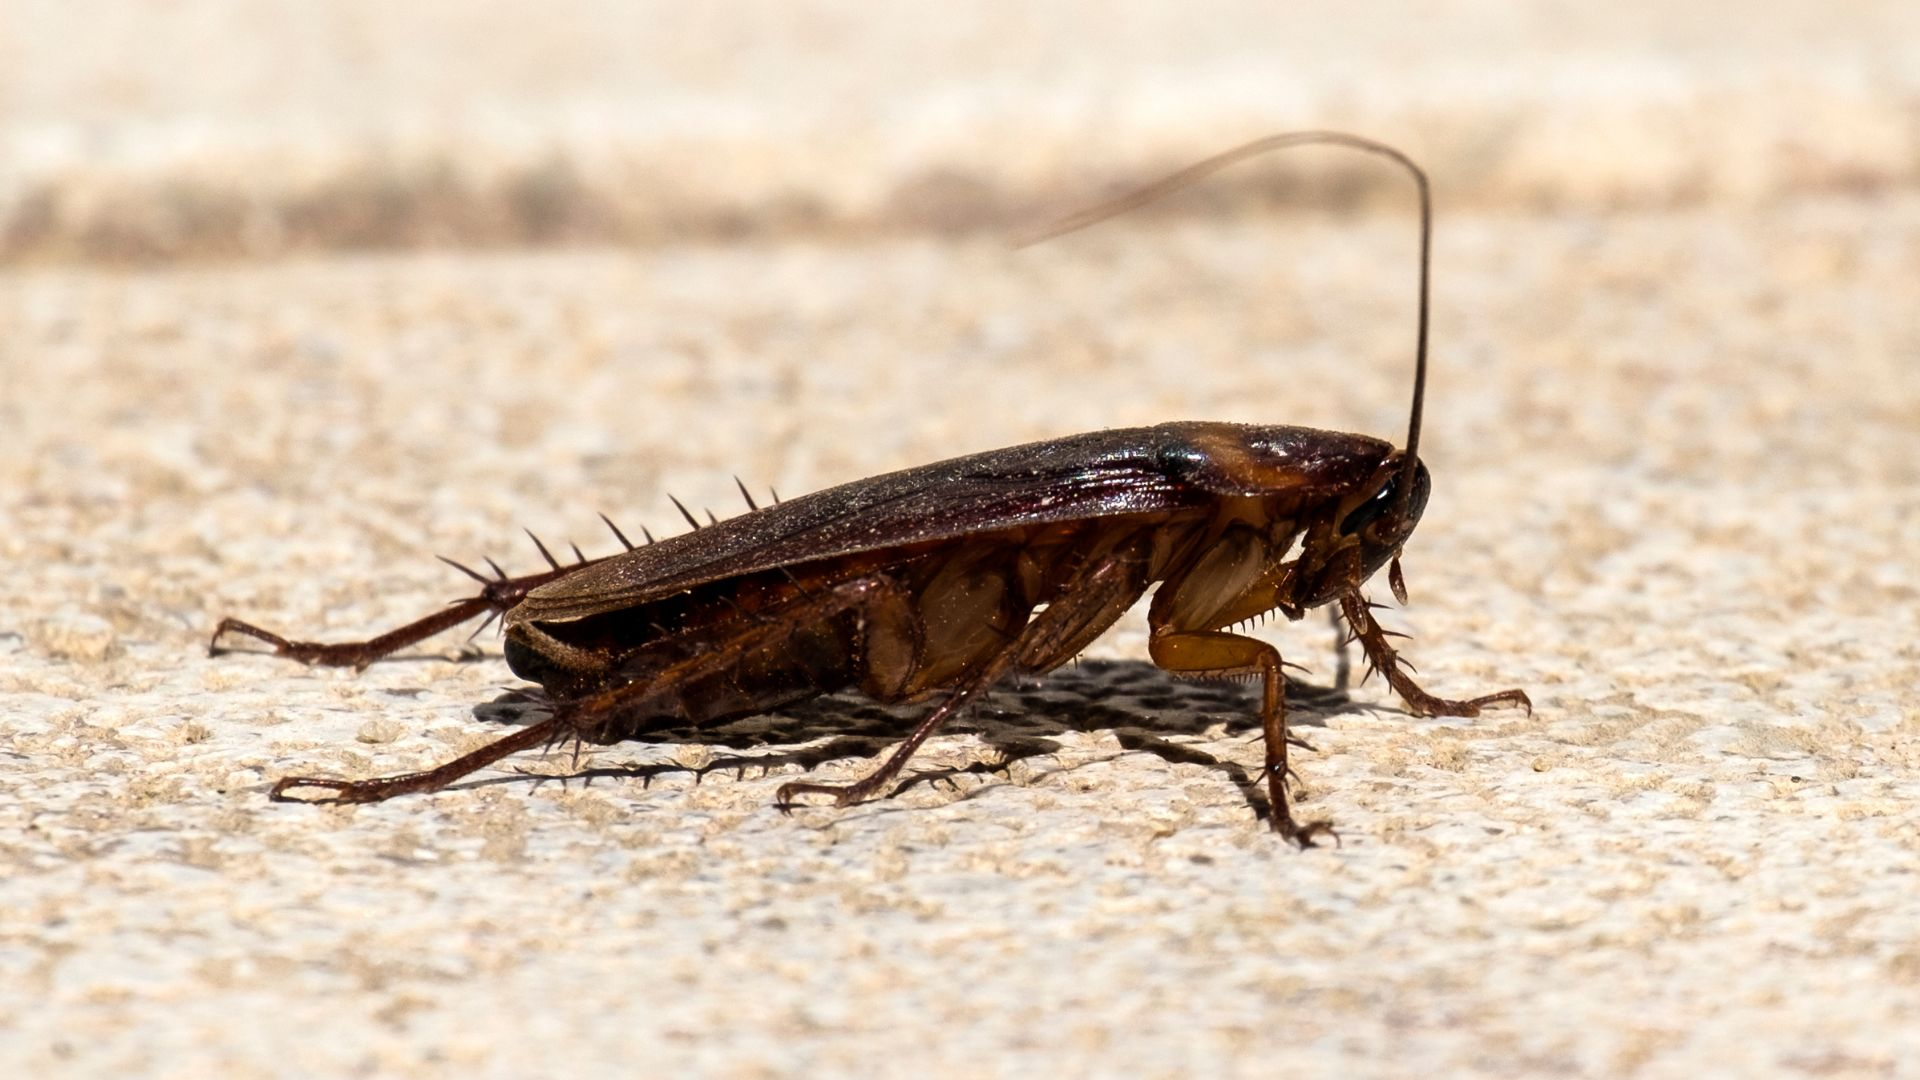 An image of an American cockroach on a stone surface.